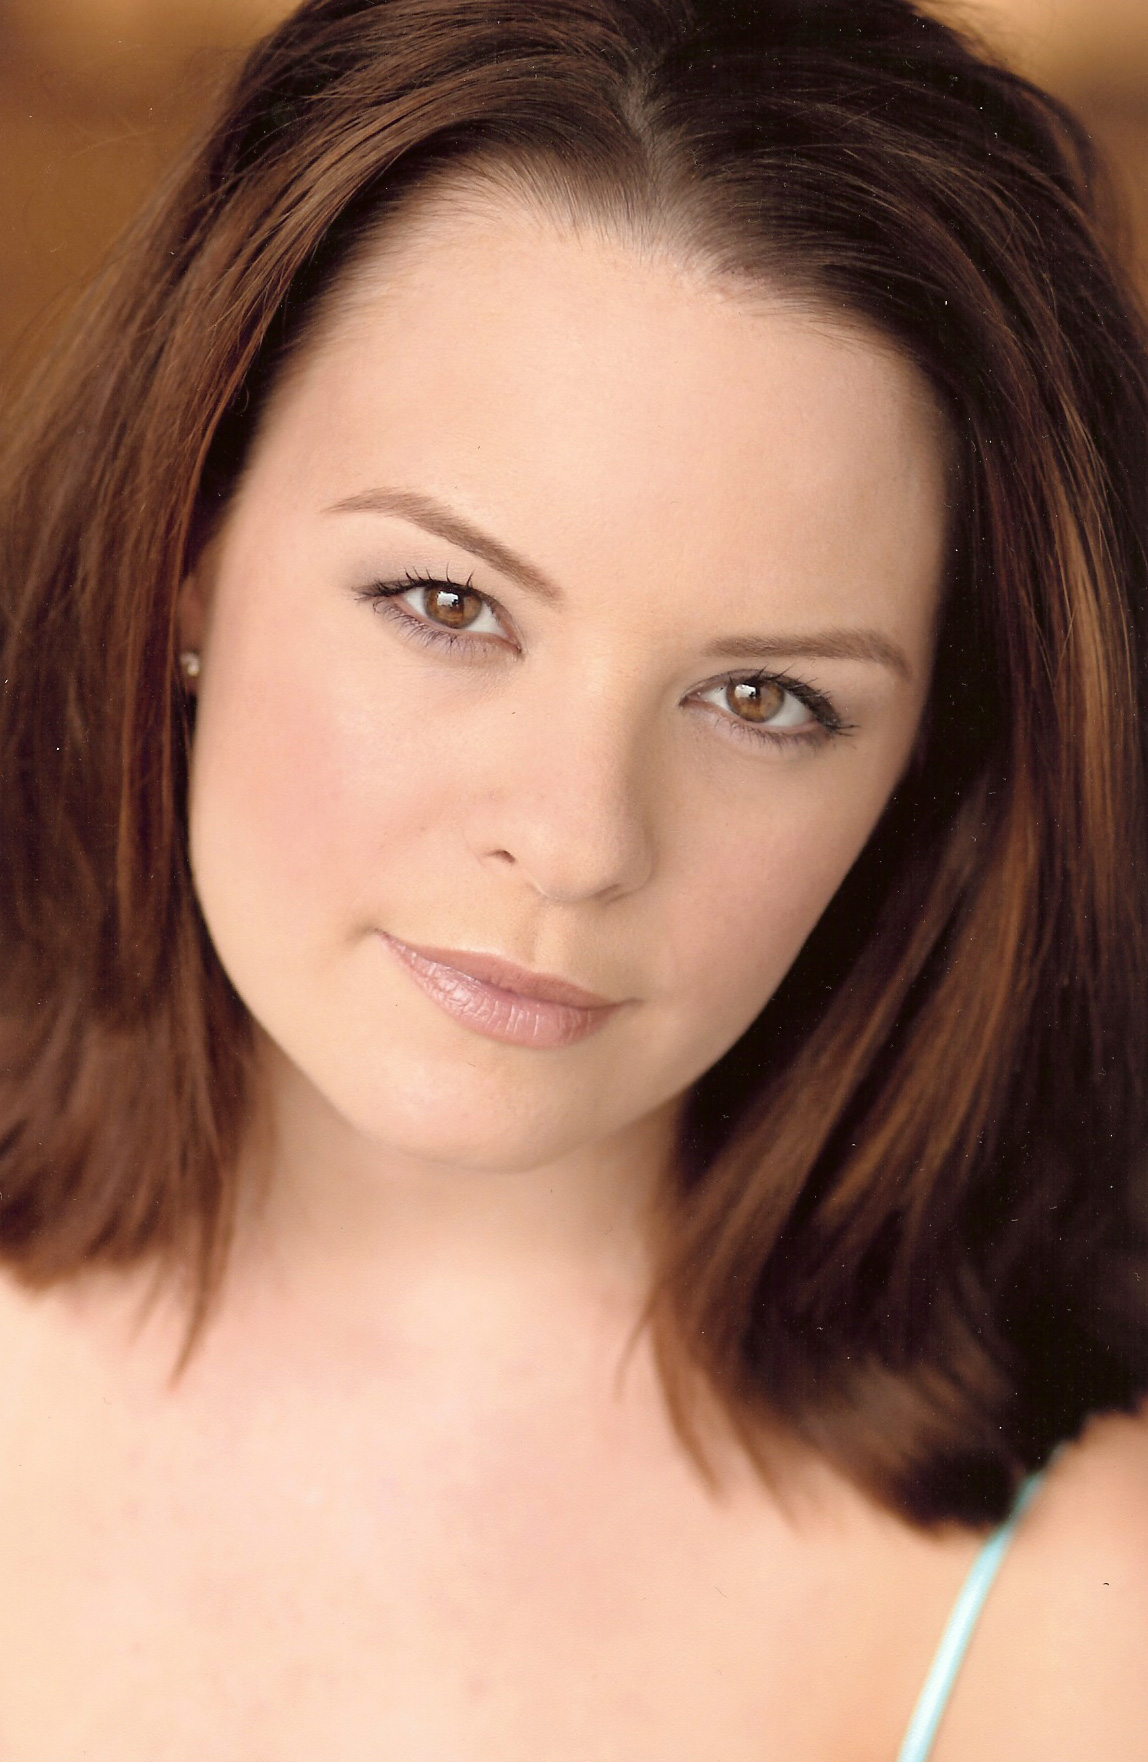 Jenna von Oy leaked wallpapers